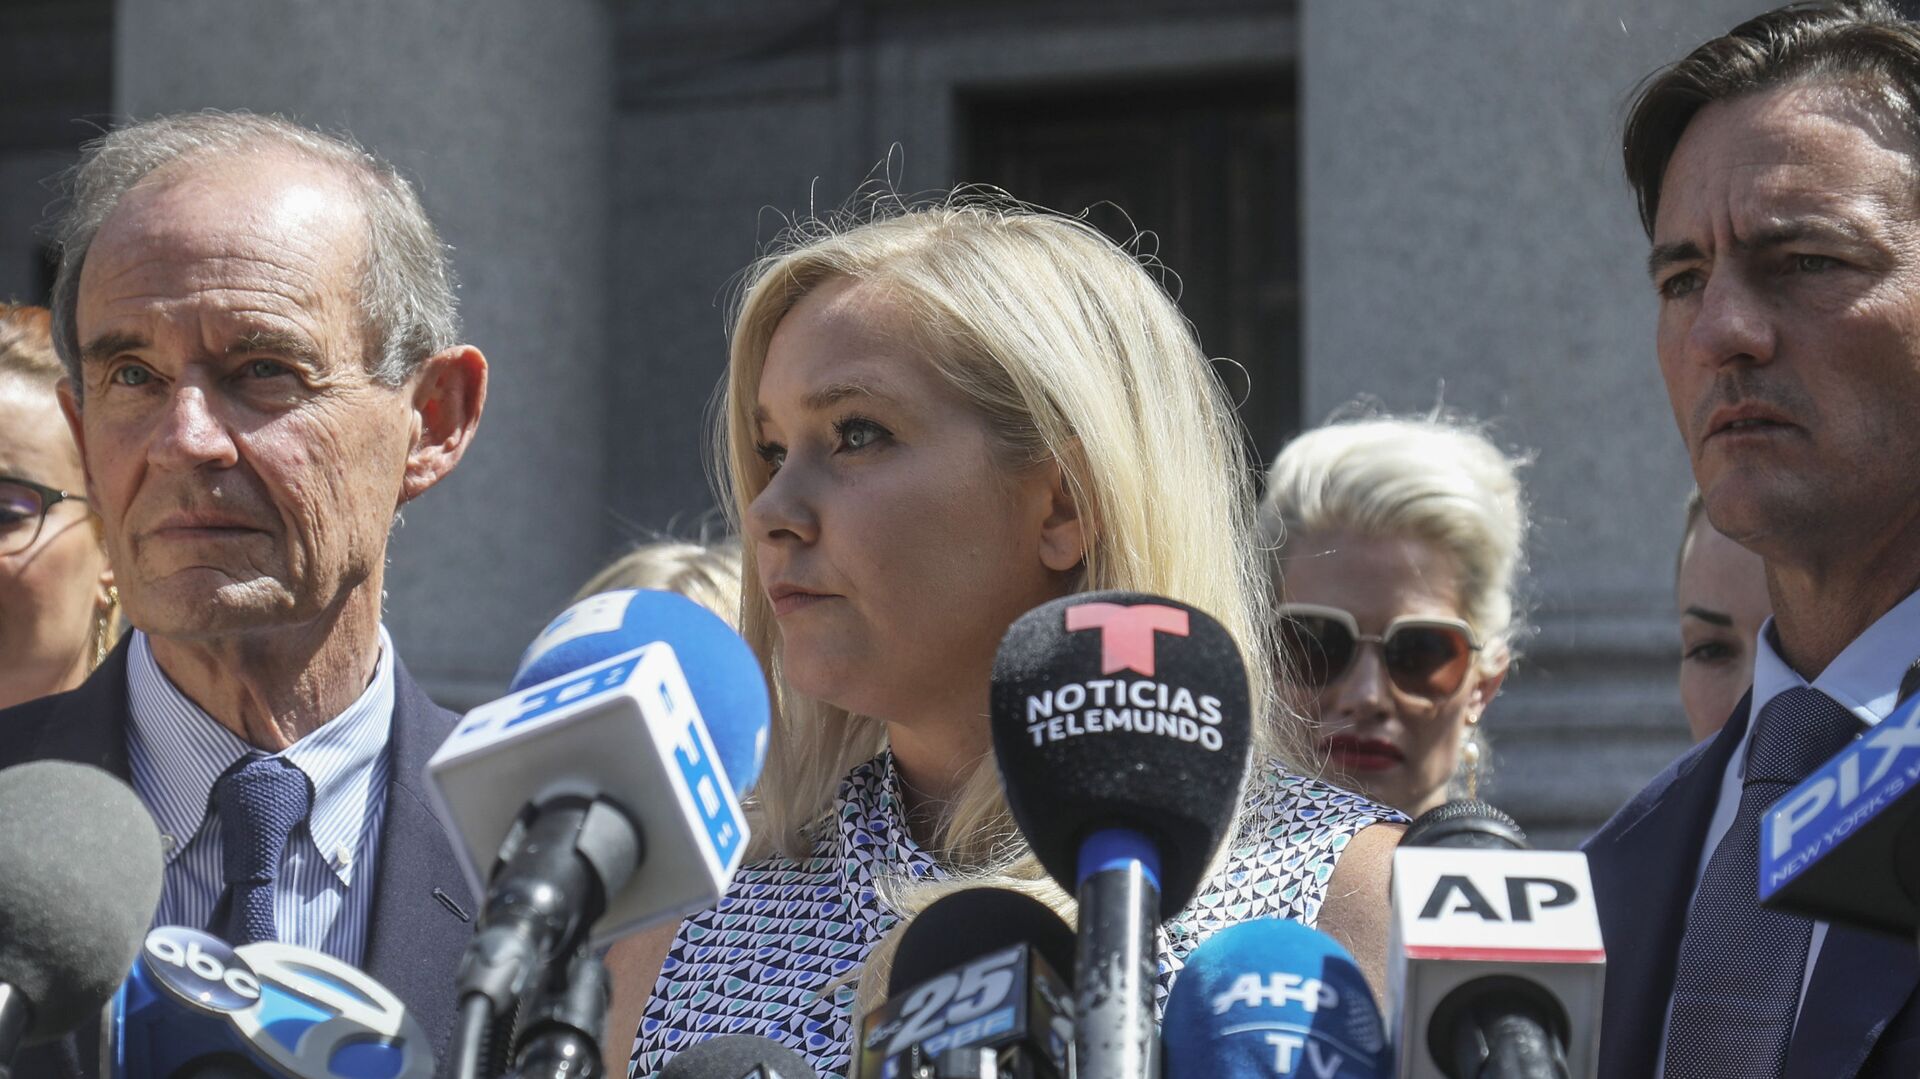 In this Aug. 27, 2019, photo, Virginia Roberts Giuffre, center, who says she was trafficked by sex offender Jeffrey Epstein, holds a news conference outside a Manhattan court where sexual assault claimants invited by a judge addressed a hearing following Epstein's jailhouse death in New York - Sputnik International, 1920, 16.01.2022